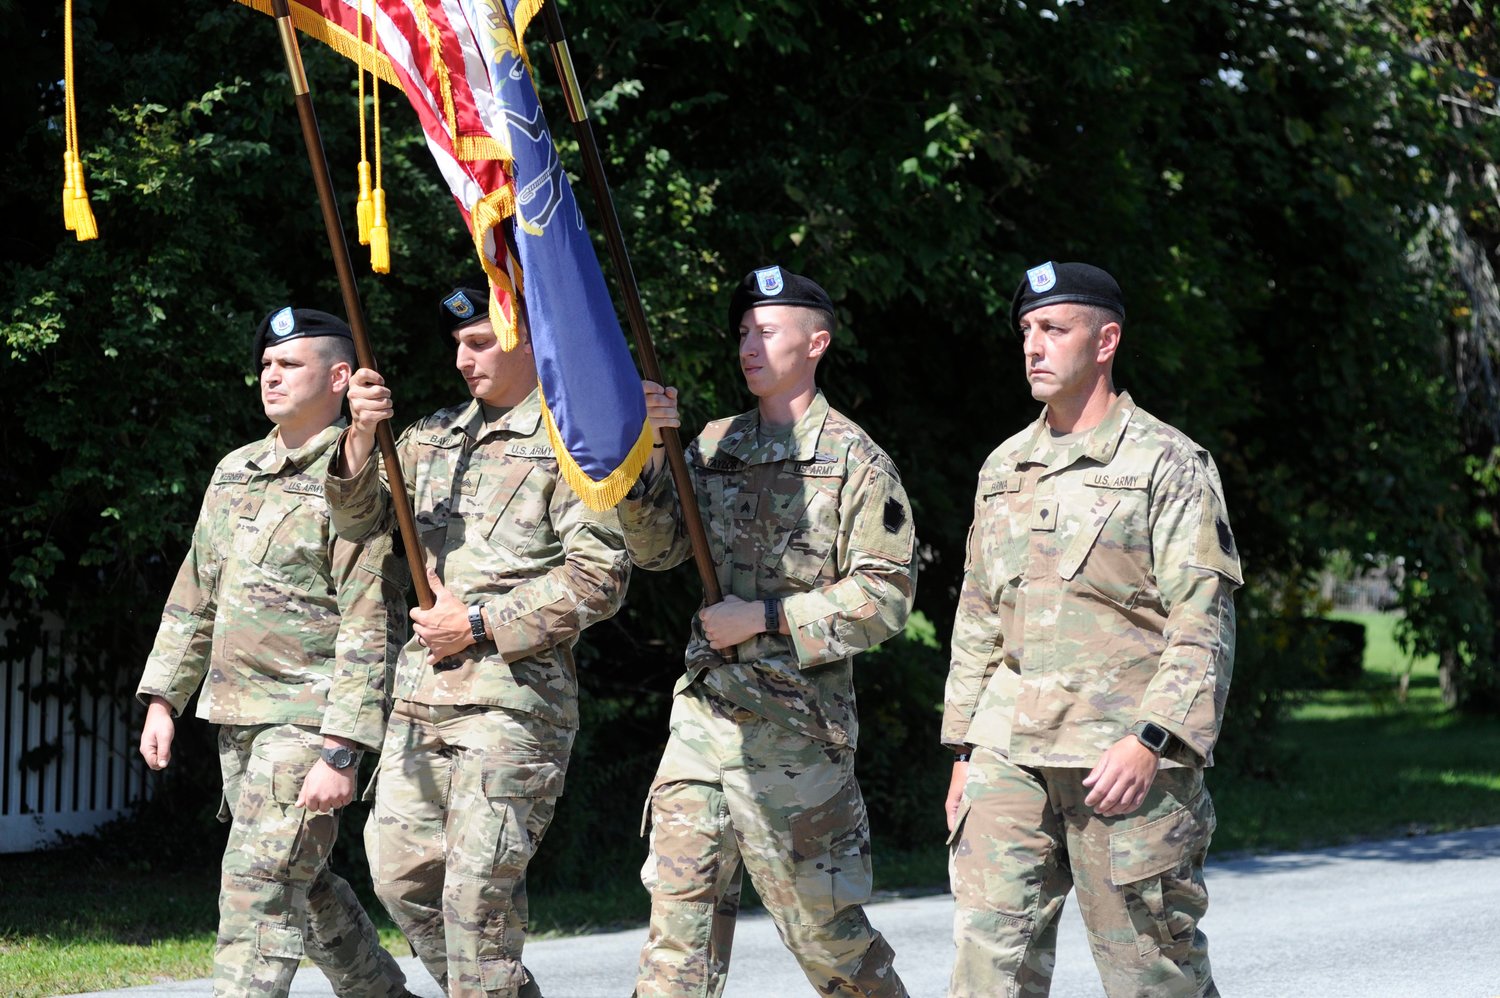 The color guard. Members of A Co. 1-109 Infantry out of Honesdale, PA.